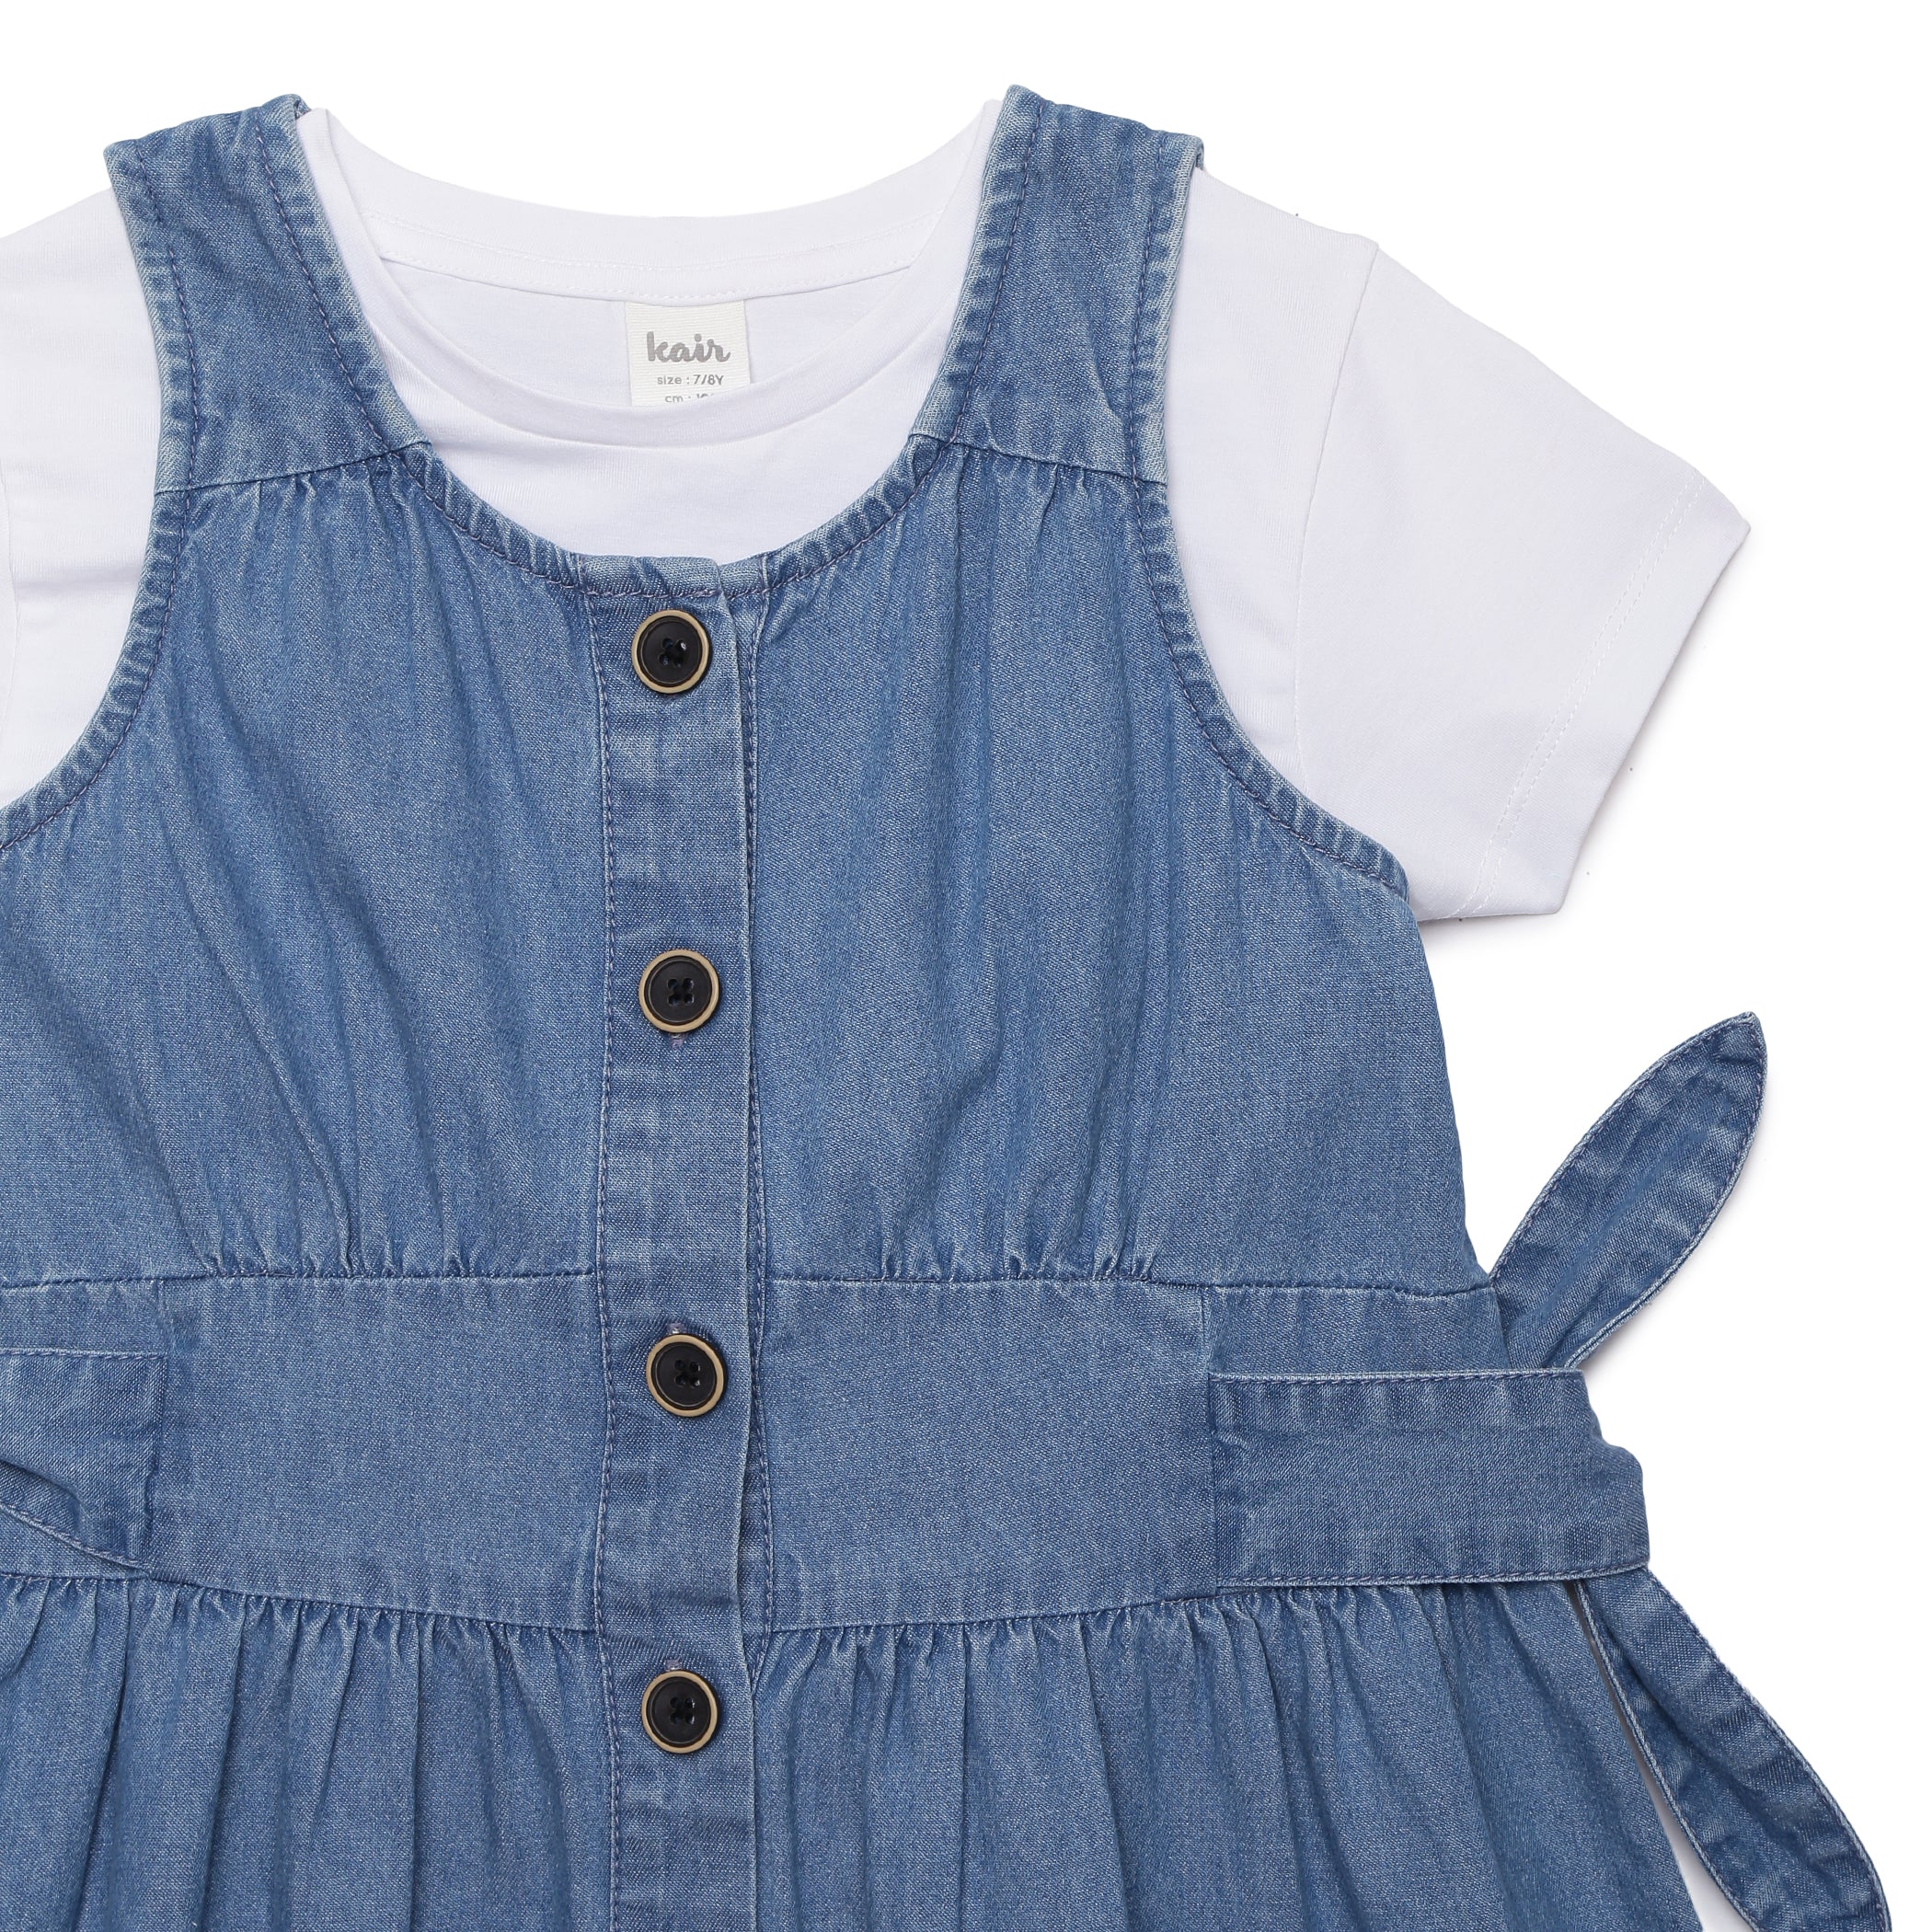 Cutecumber Girls Denim Polka Dotted Pinafore Blue Dress with Cotton Knit  Inner. CC5296D-BLUE-16 : Amazon.in: Clothing & Accessories